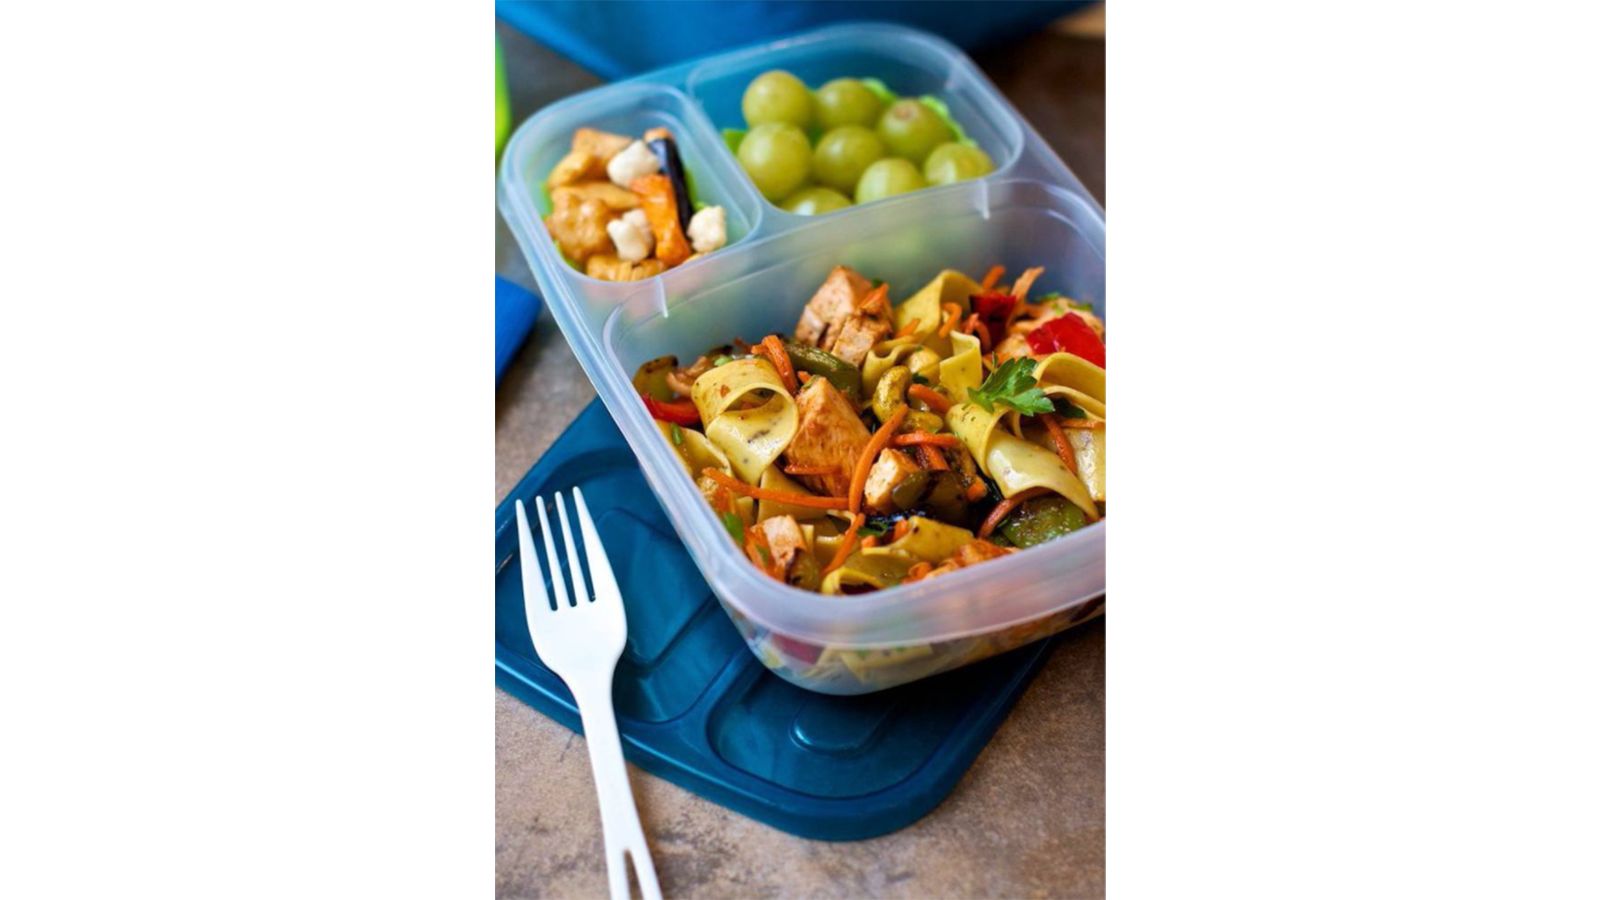 The Best Lunch Boxes for School, Work, or Travel